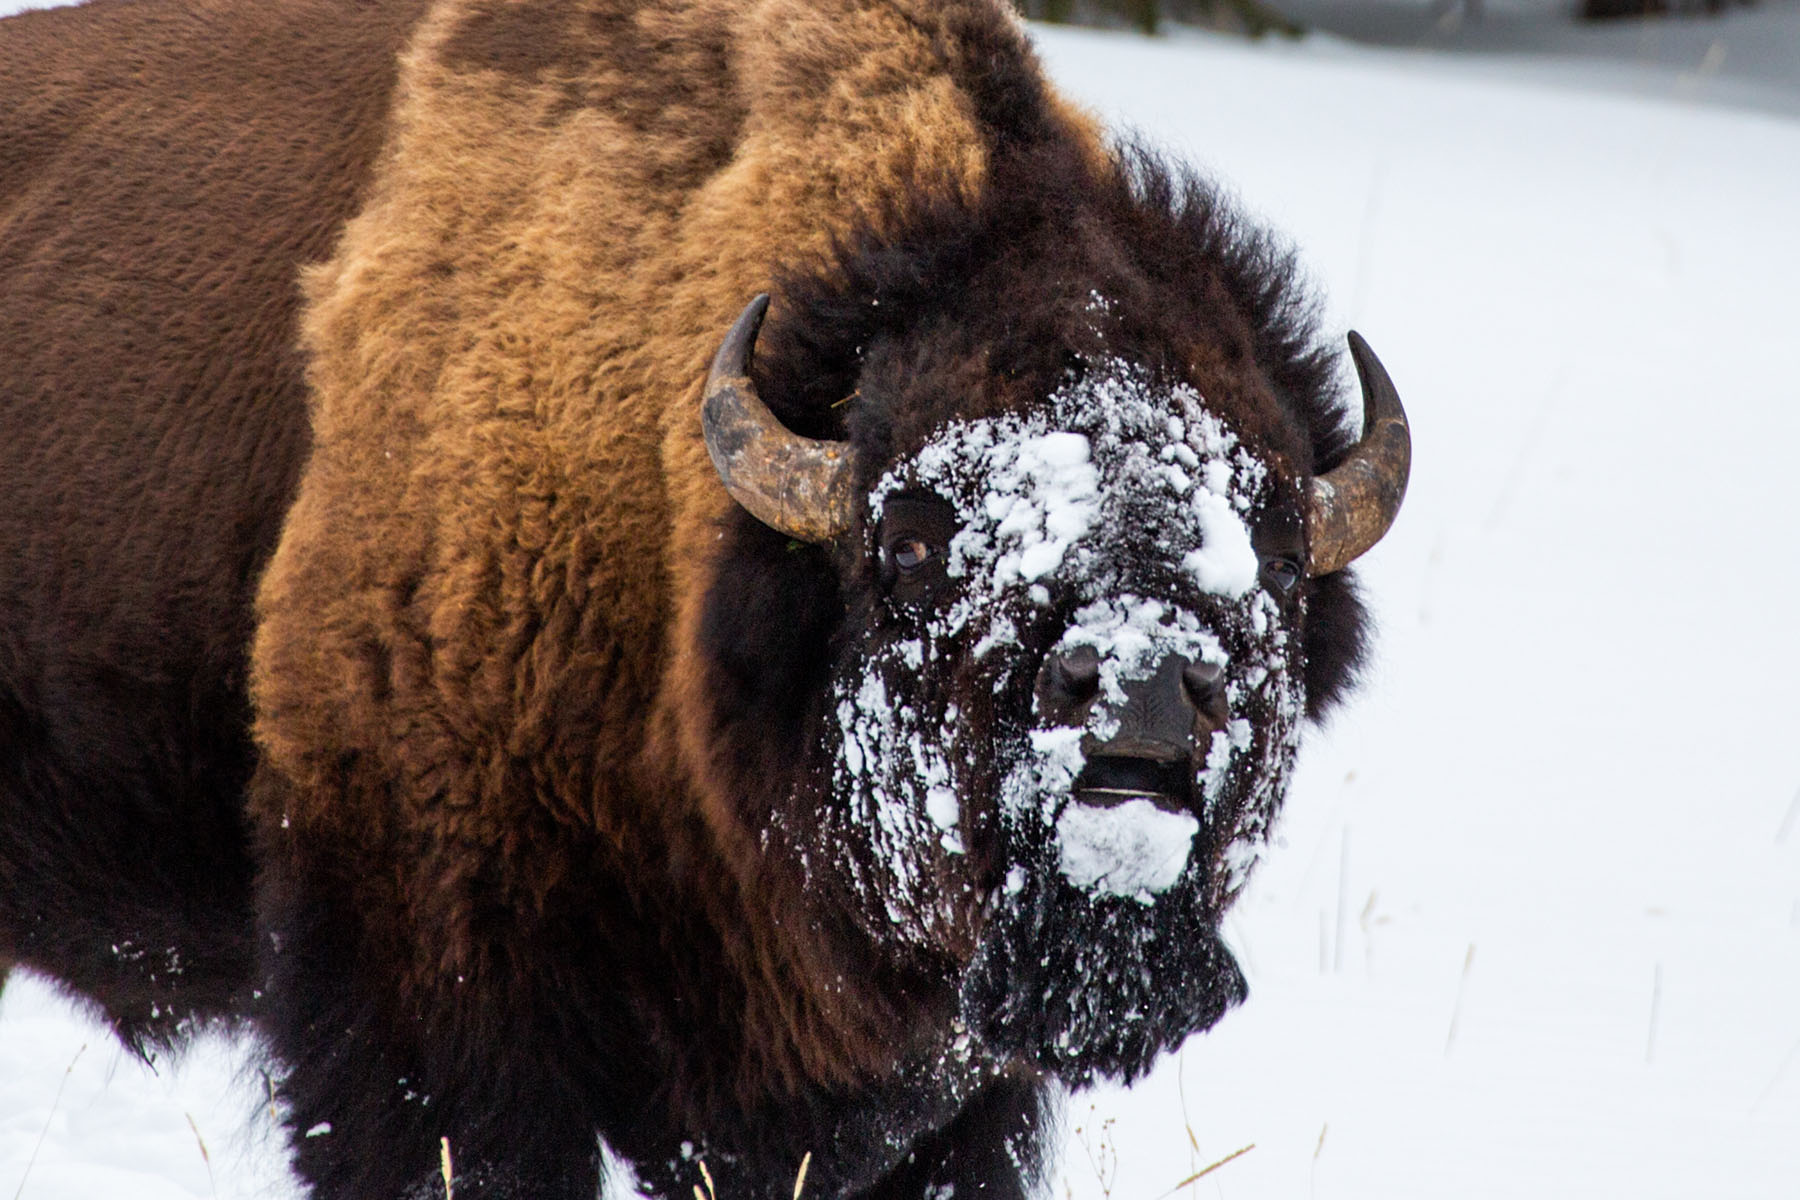 Bison, Yellowstone, February 2022.  Click for next photo.